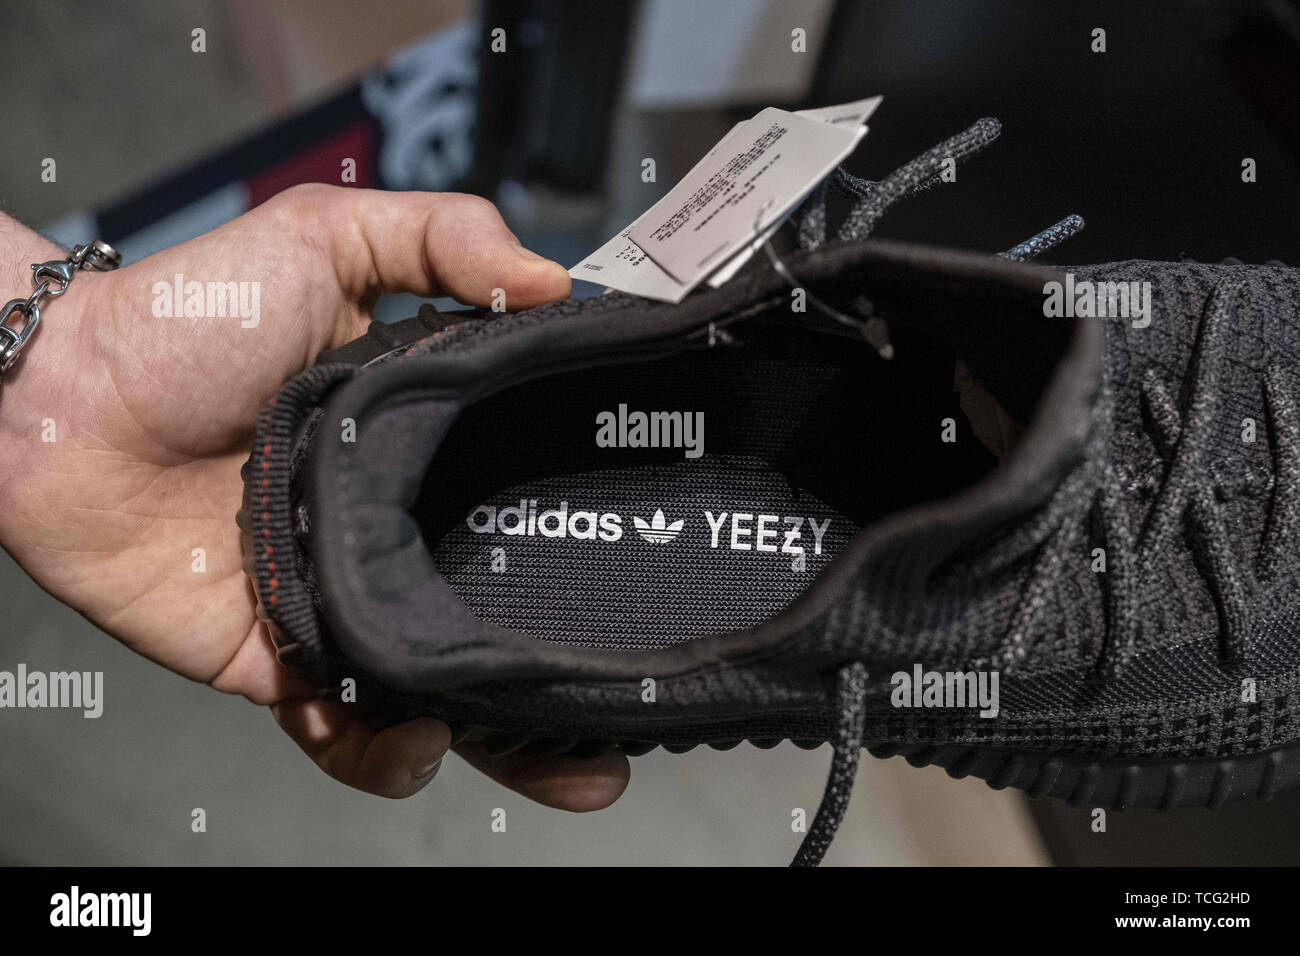 Barcelona, Catalonia, Spain. 7th June, 2019. A seller shows off the new Adidas  Yeezy Boost 350 shoe model at the reseller store.The German manufacturer of  sports shoes Adidas has launched the limited